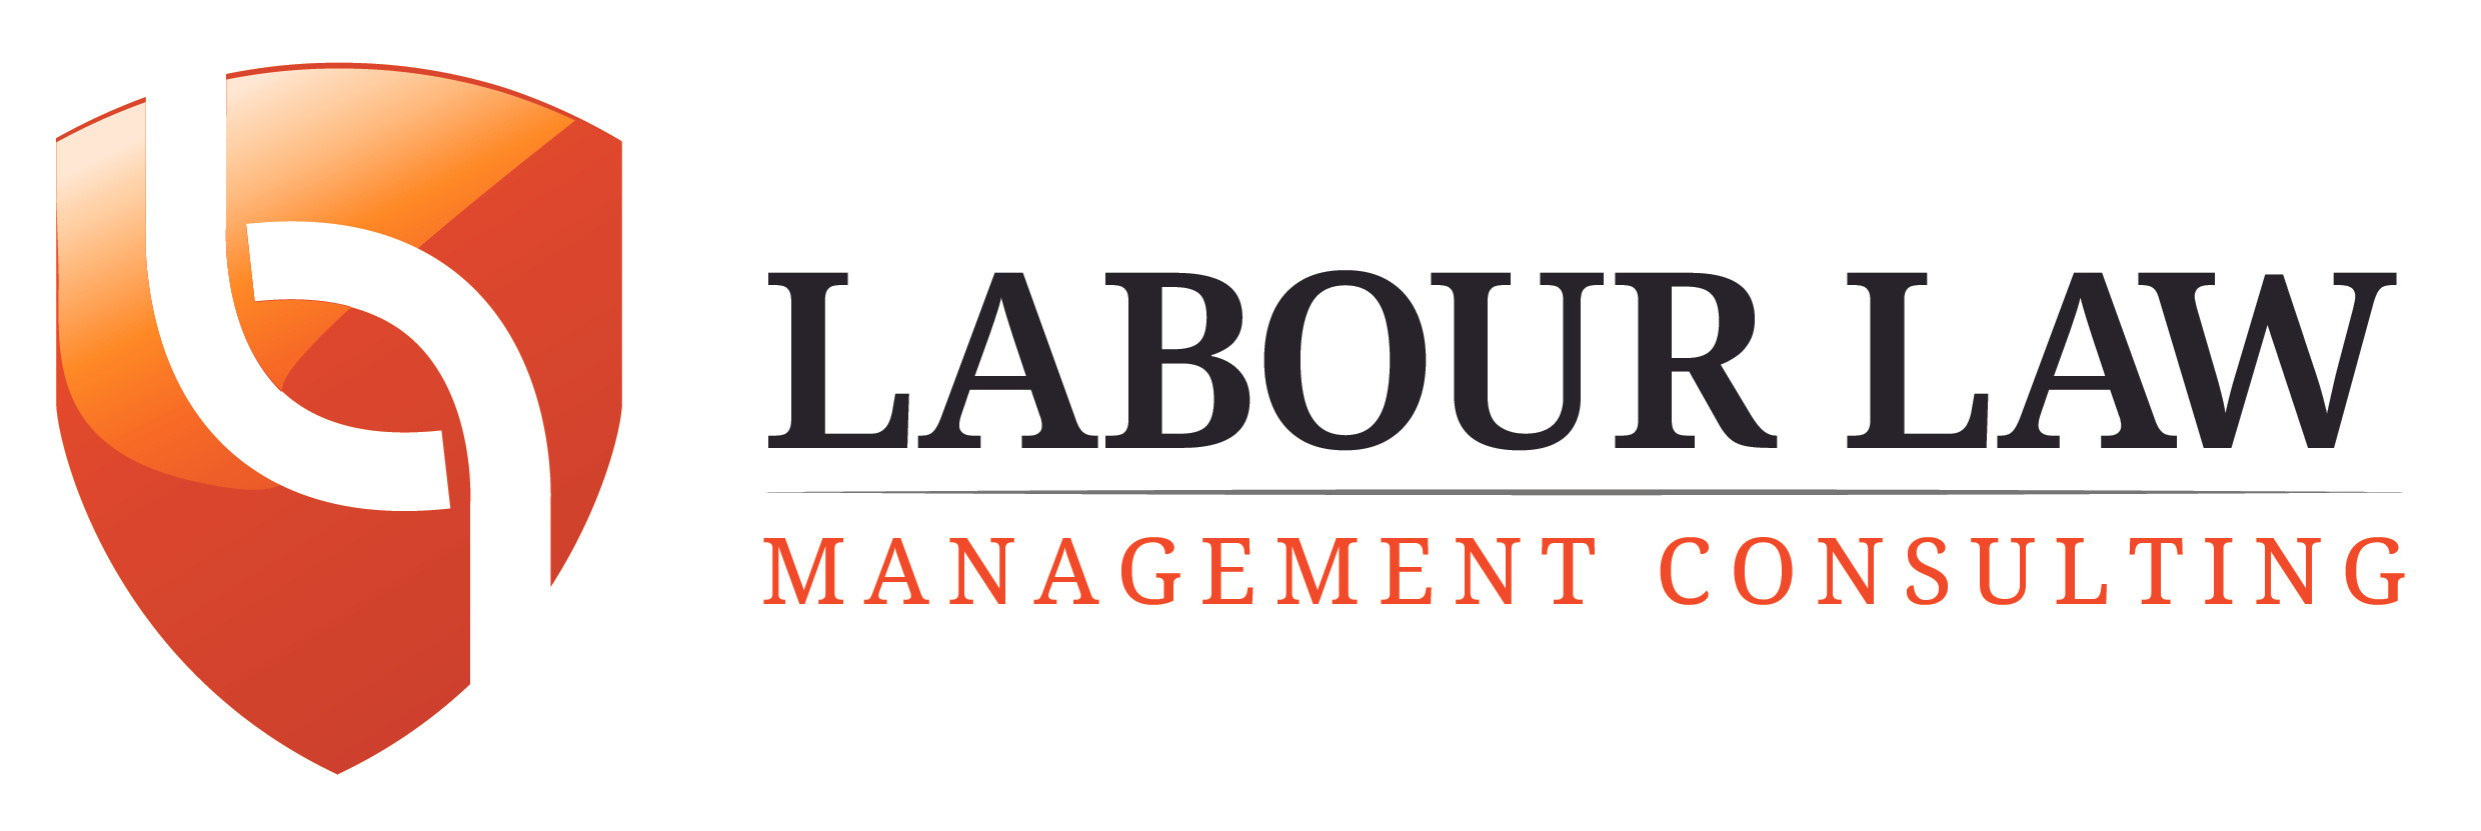 Labour Law Management Consulting